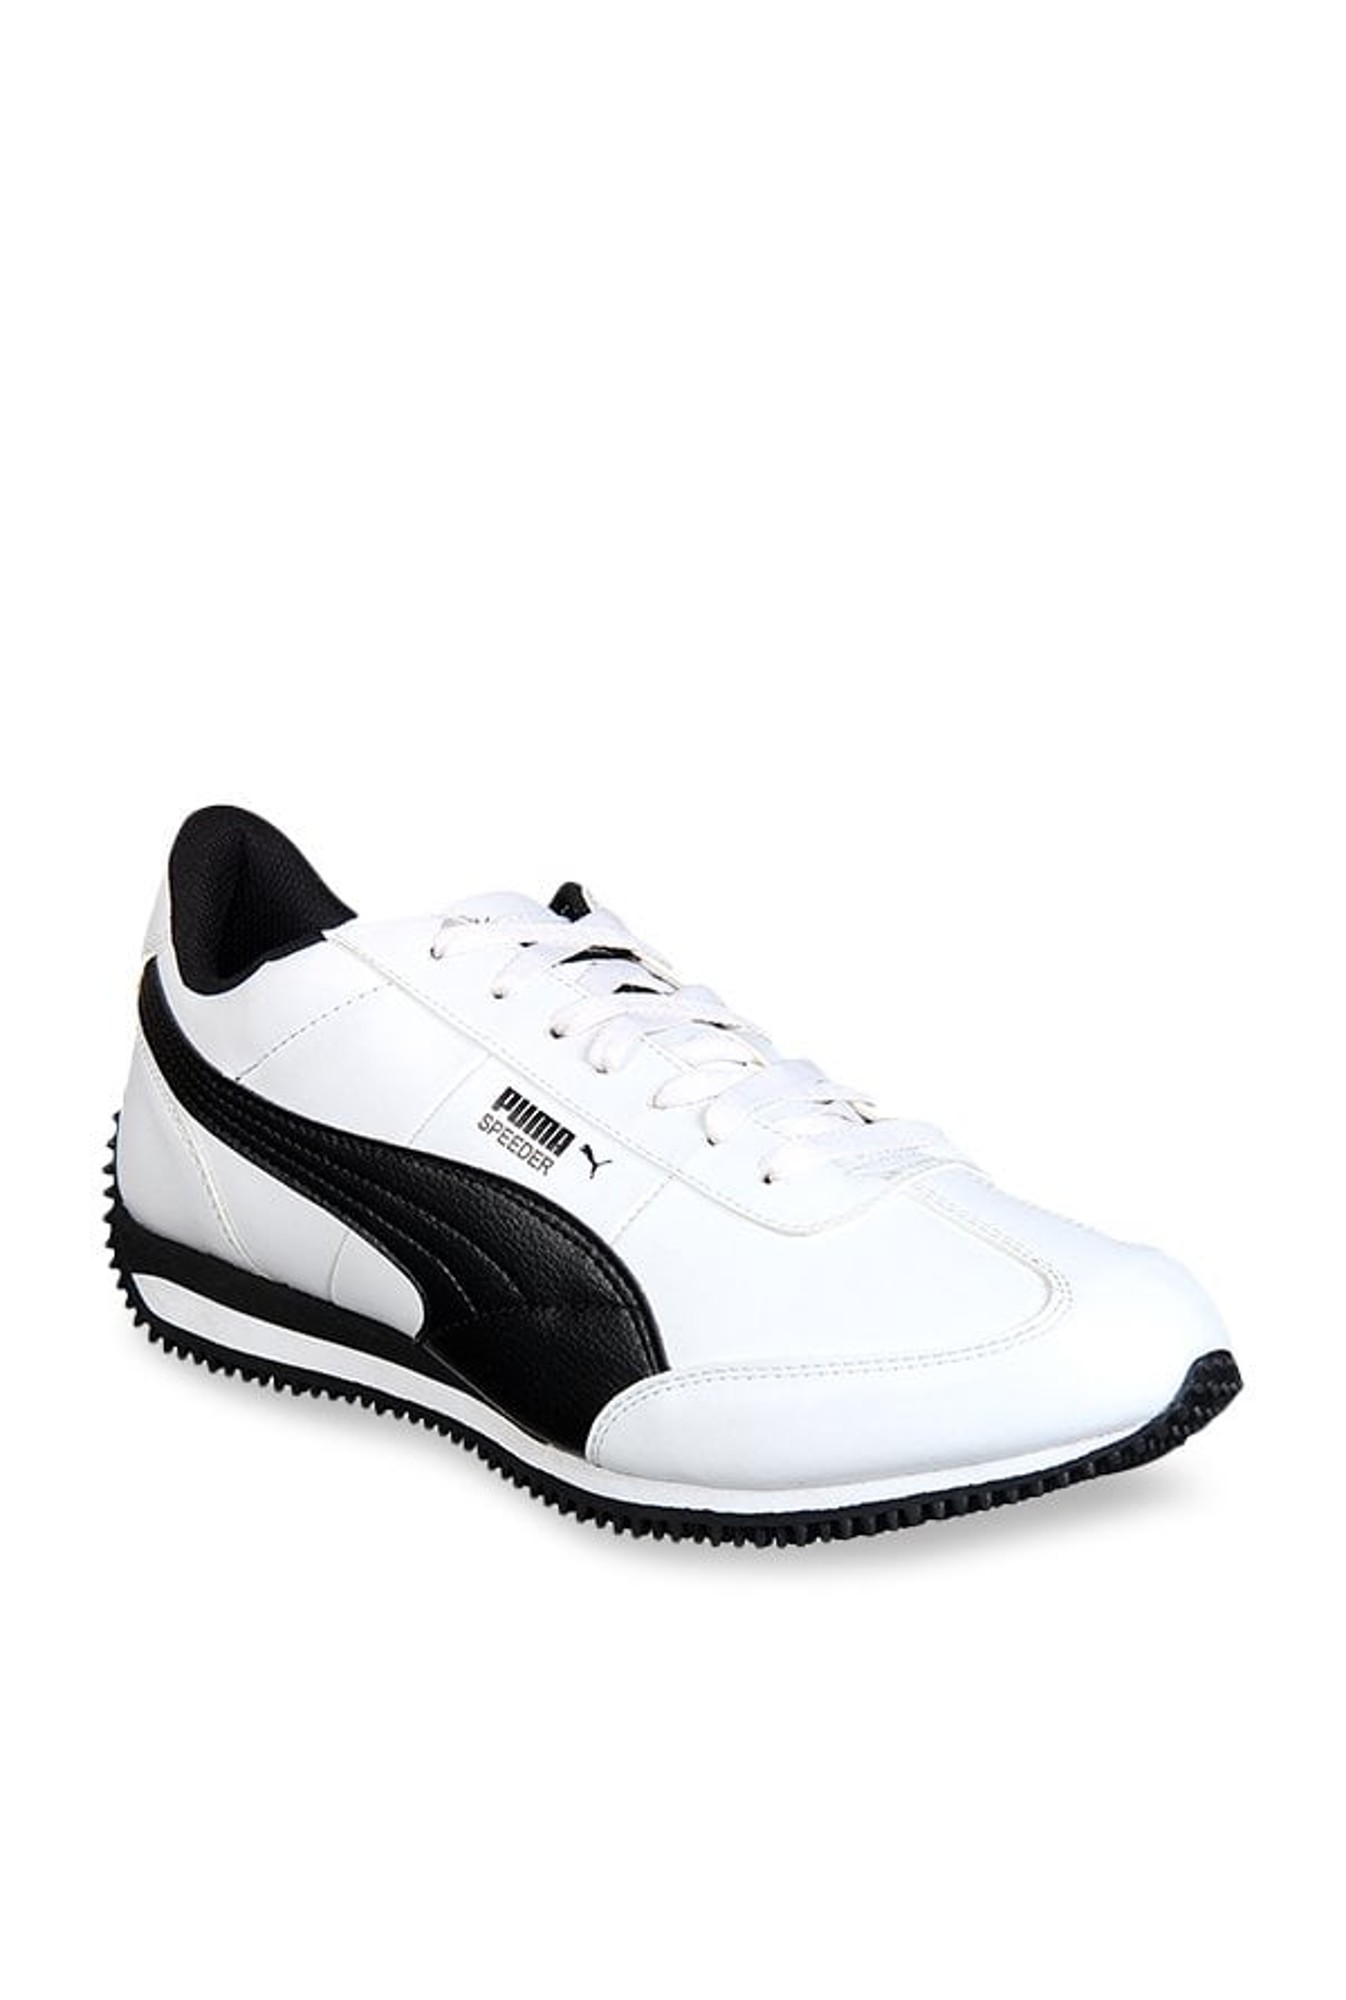 Buy Puma Velocity IDP White & Black Running Shoes for Men at Best Price ...